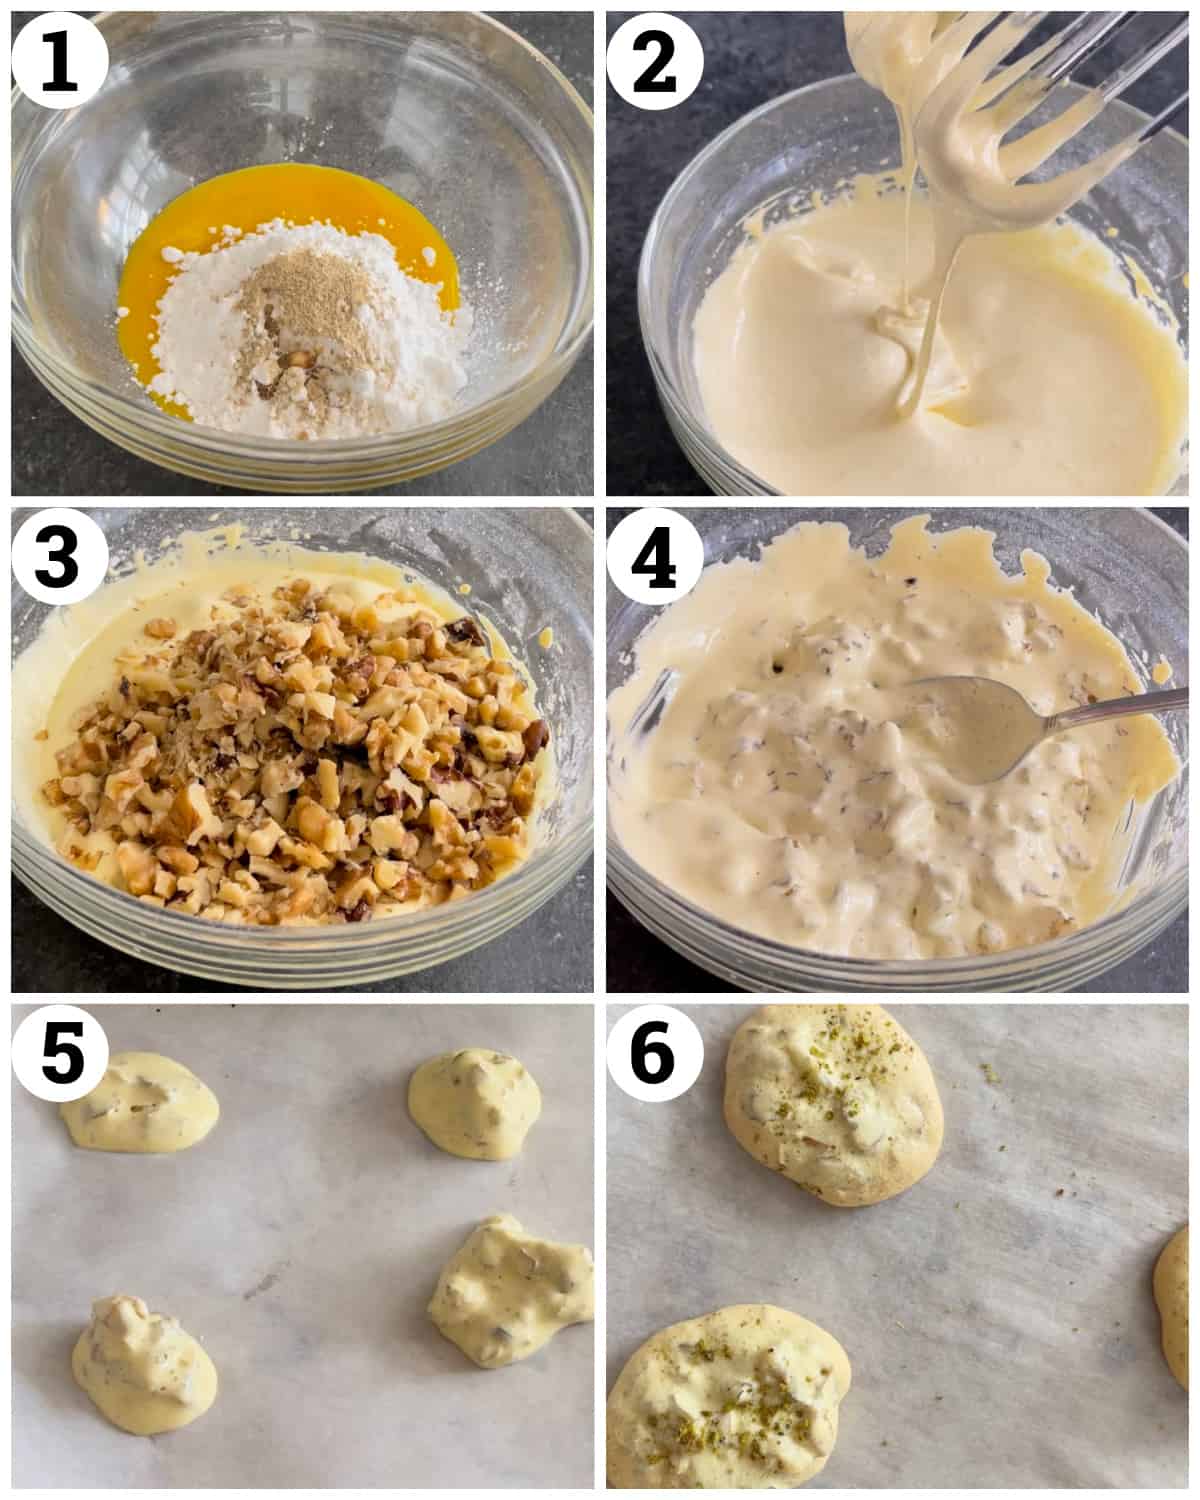 beat the yolks with the powdered sugar, vanilla and cardamom. Fold in the walnuts and drop the cookie mixture on the baking sheet. Bake for 15 minutes. 